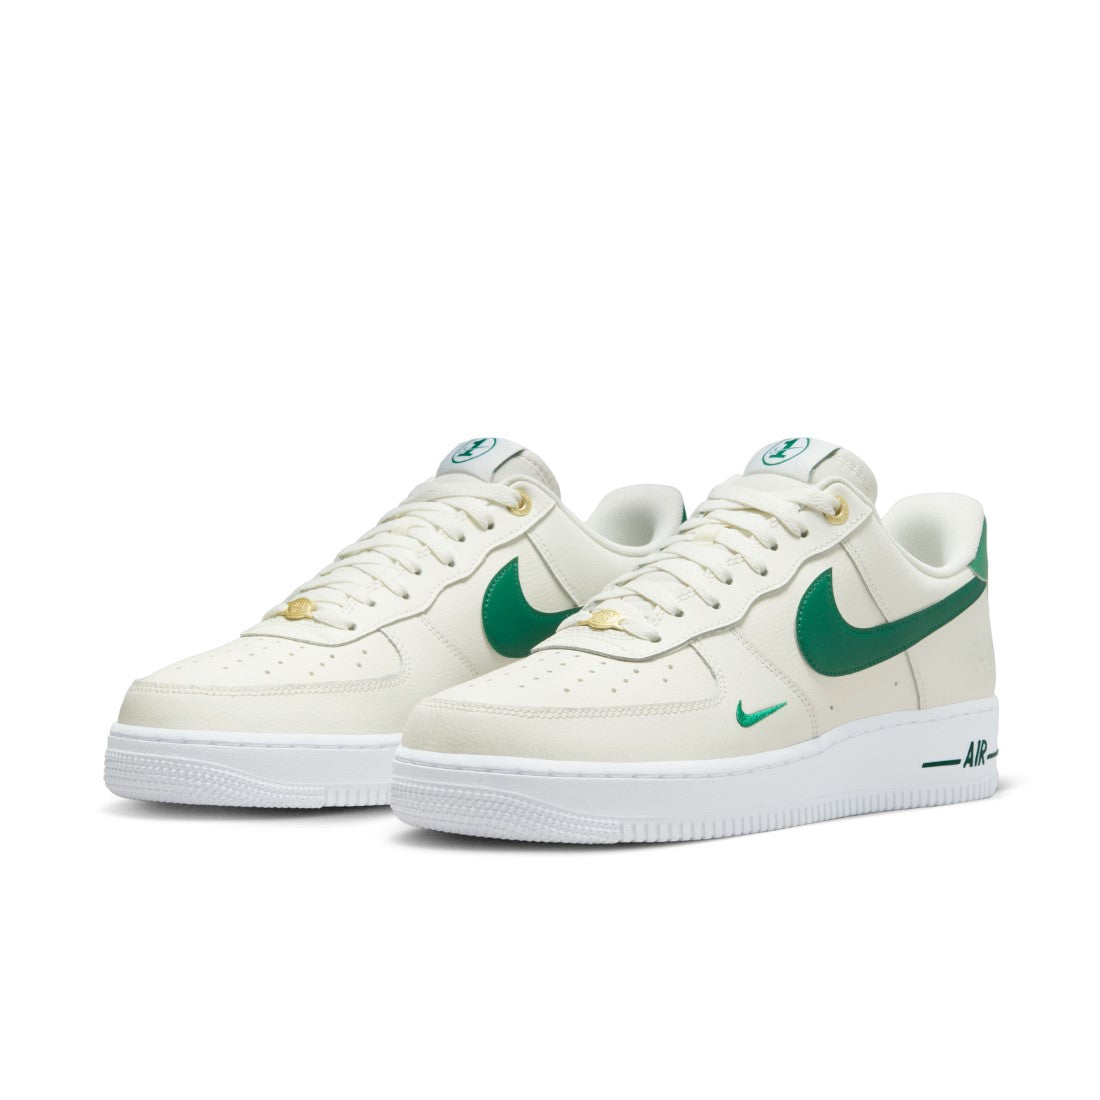 Air Force 1 Low 07 LV8 Lifestyle Shoes